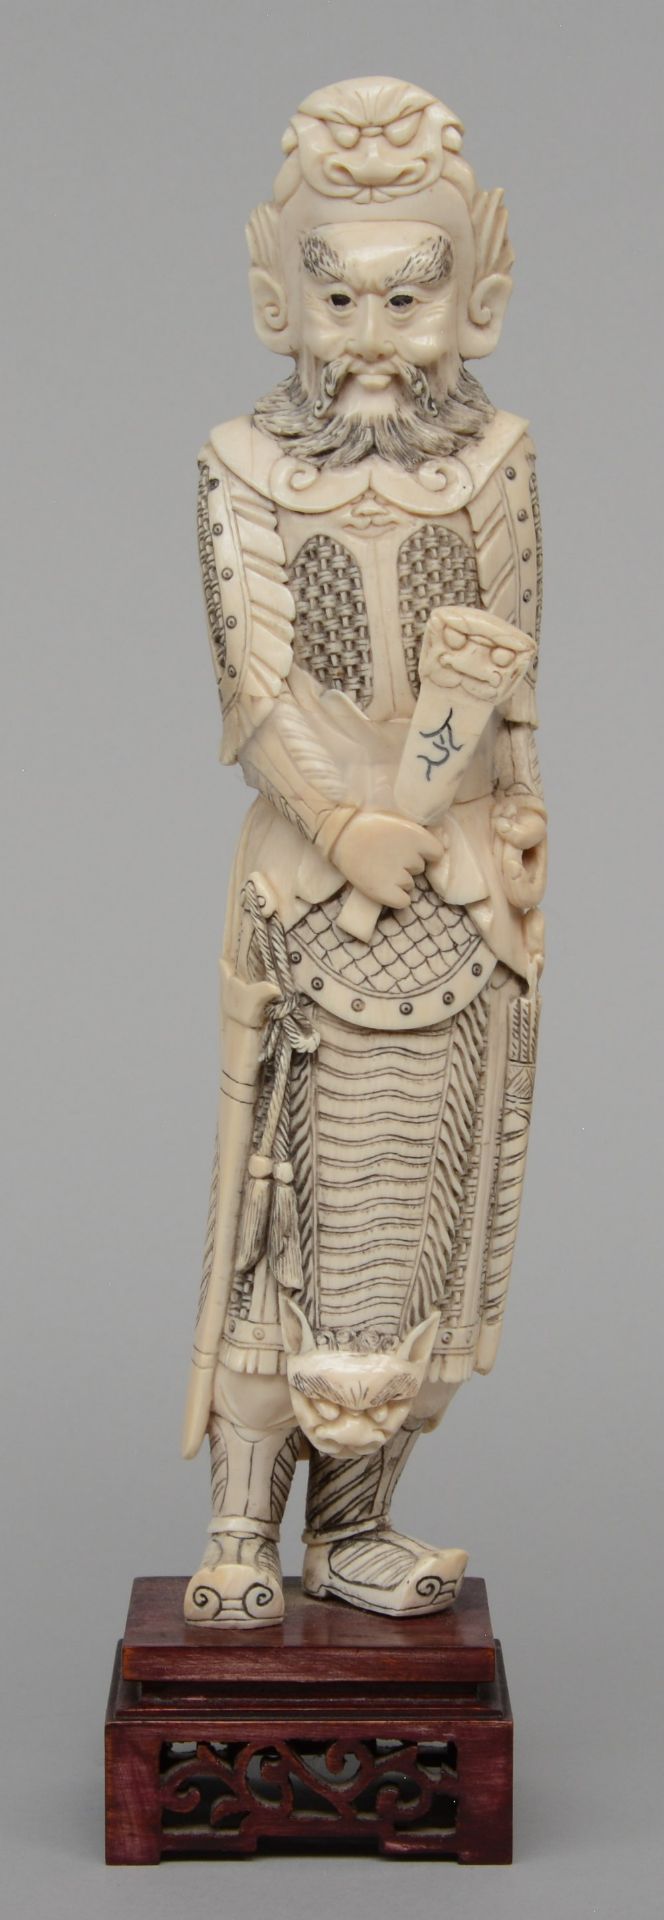 A Chinese ivory carved warrior on a wooden base, ca. 1900, H 35 cm